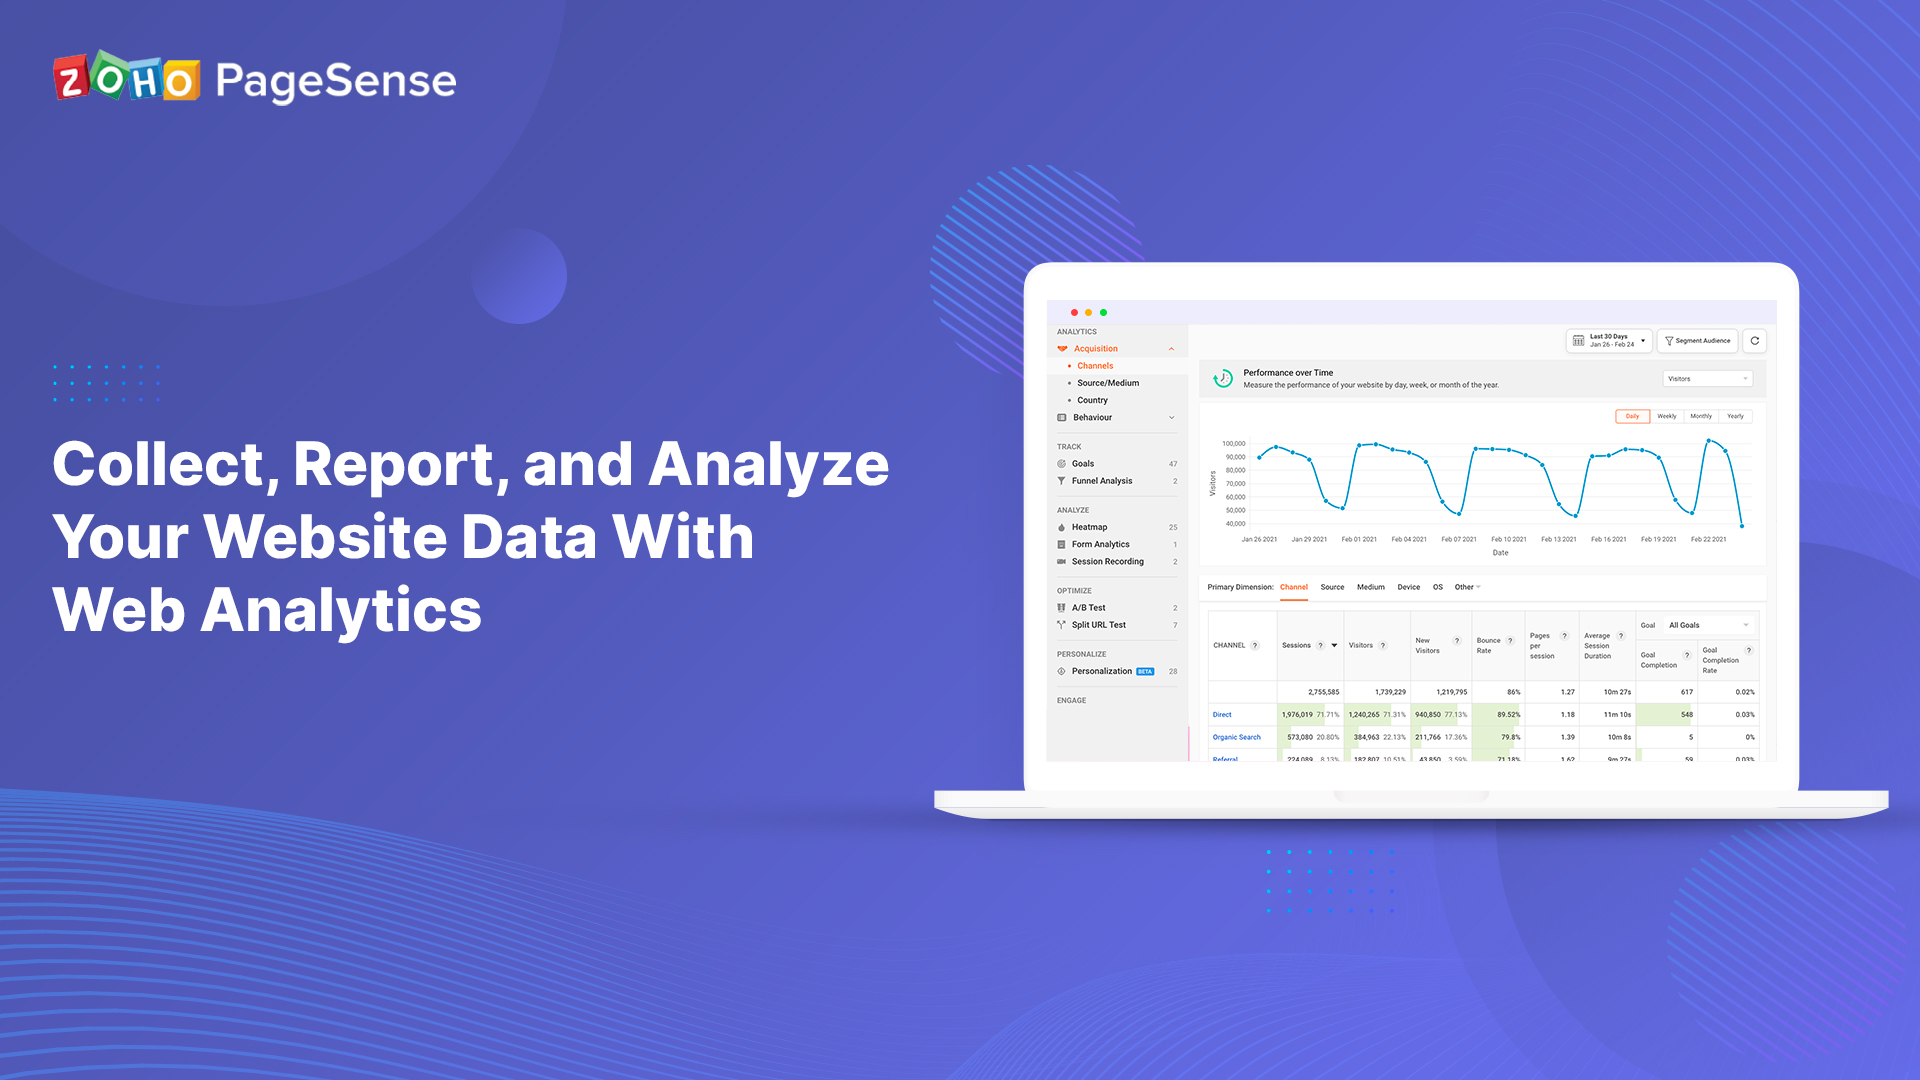 Collect, Report, and Analyze Your Website Data With Web Analytics